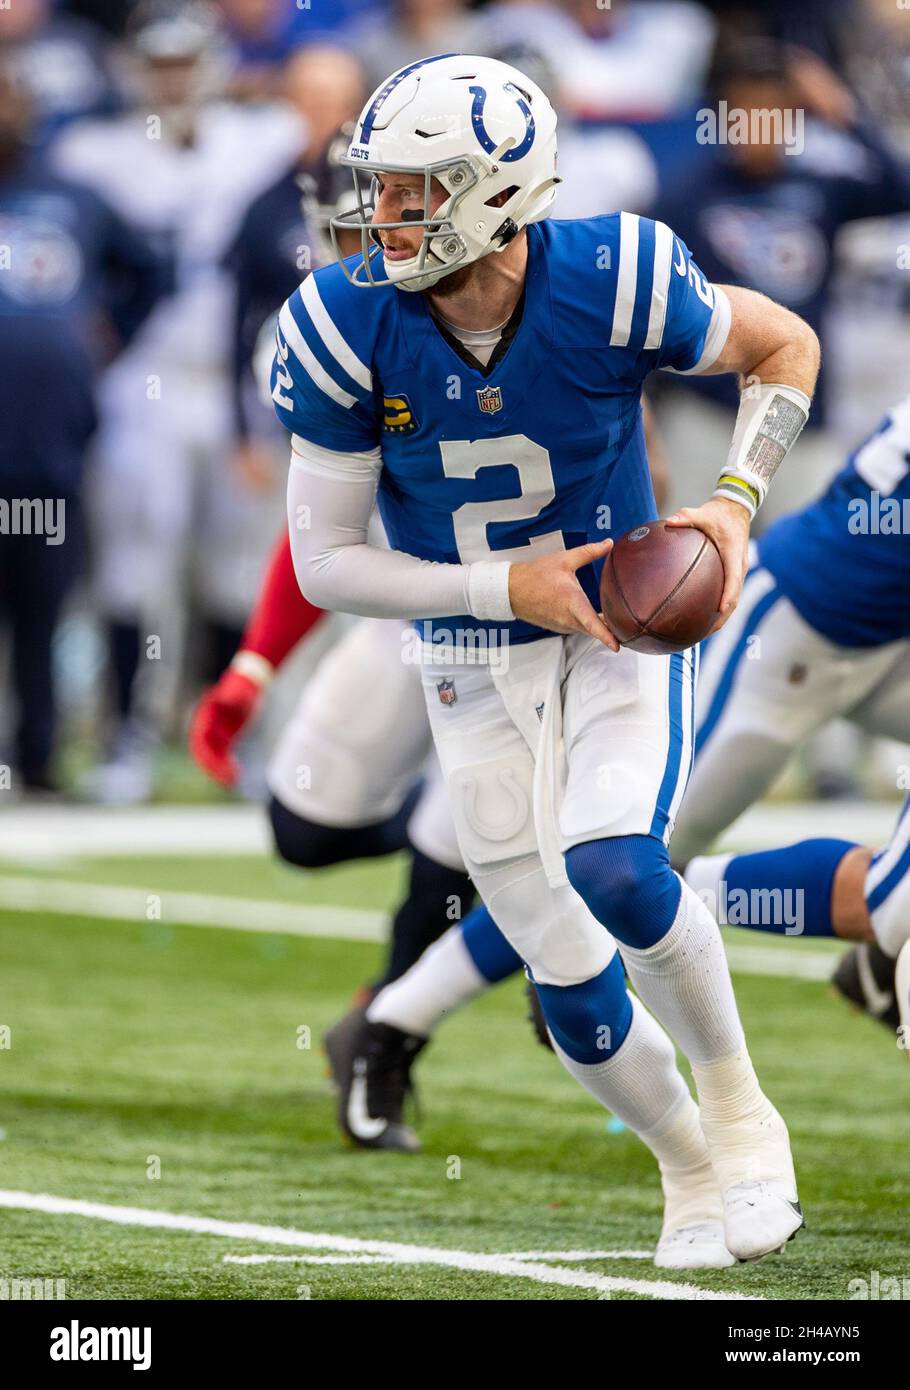 October 31, 2021: Indianapolis Colts quarterback Carson Wentz (2) pivots with the ball during NFL football game action between the Tennessee Titans and the Indianapolis Colts at Lucas Oil Stadium in Indianapolis, Indiana. Tennessee defeated Indianapolis 34-31 in overtime. John Mersits/CSM. Stock Photo